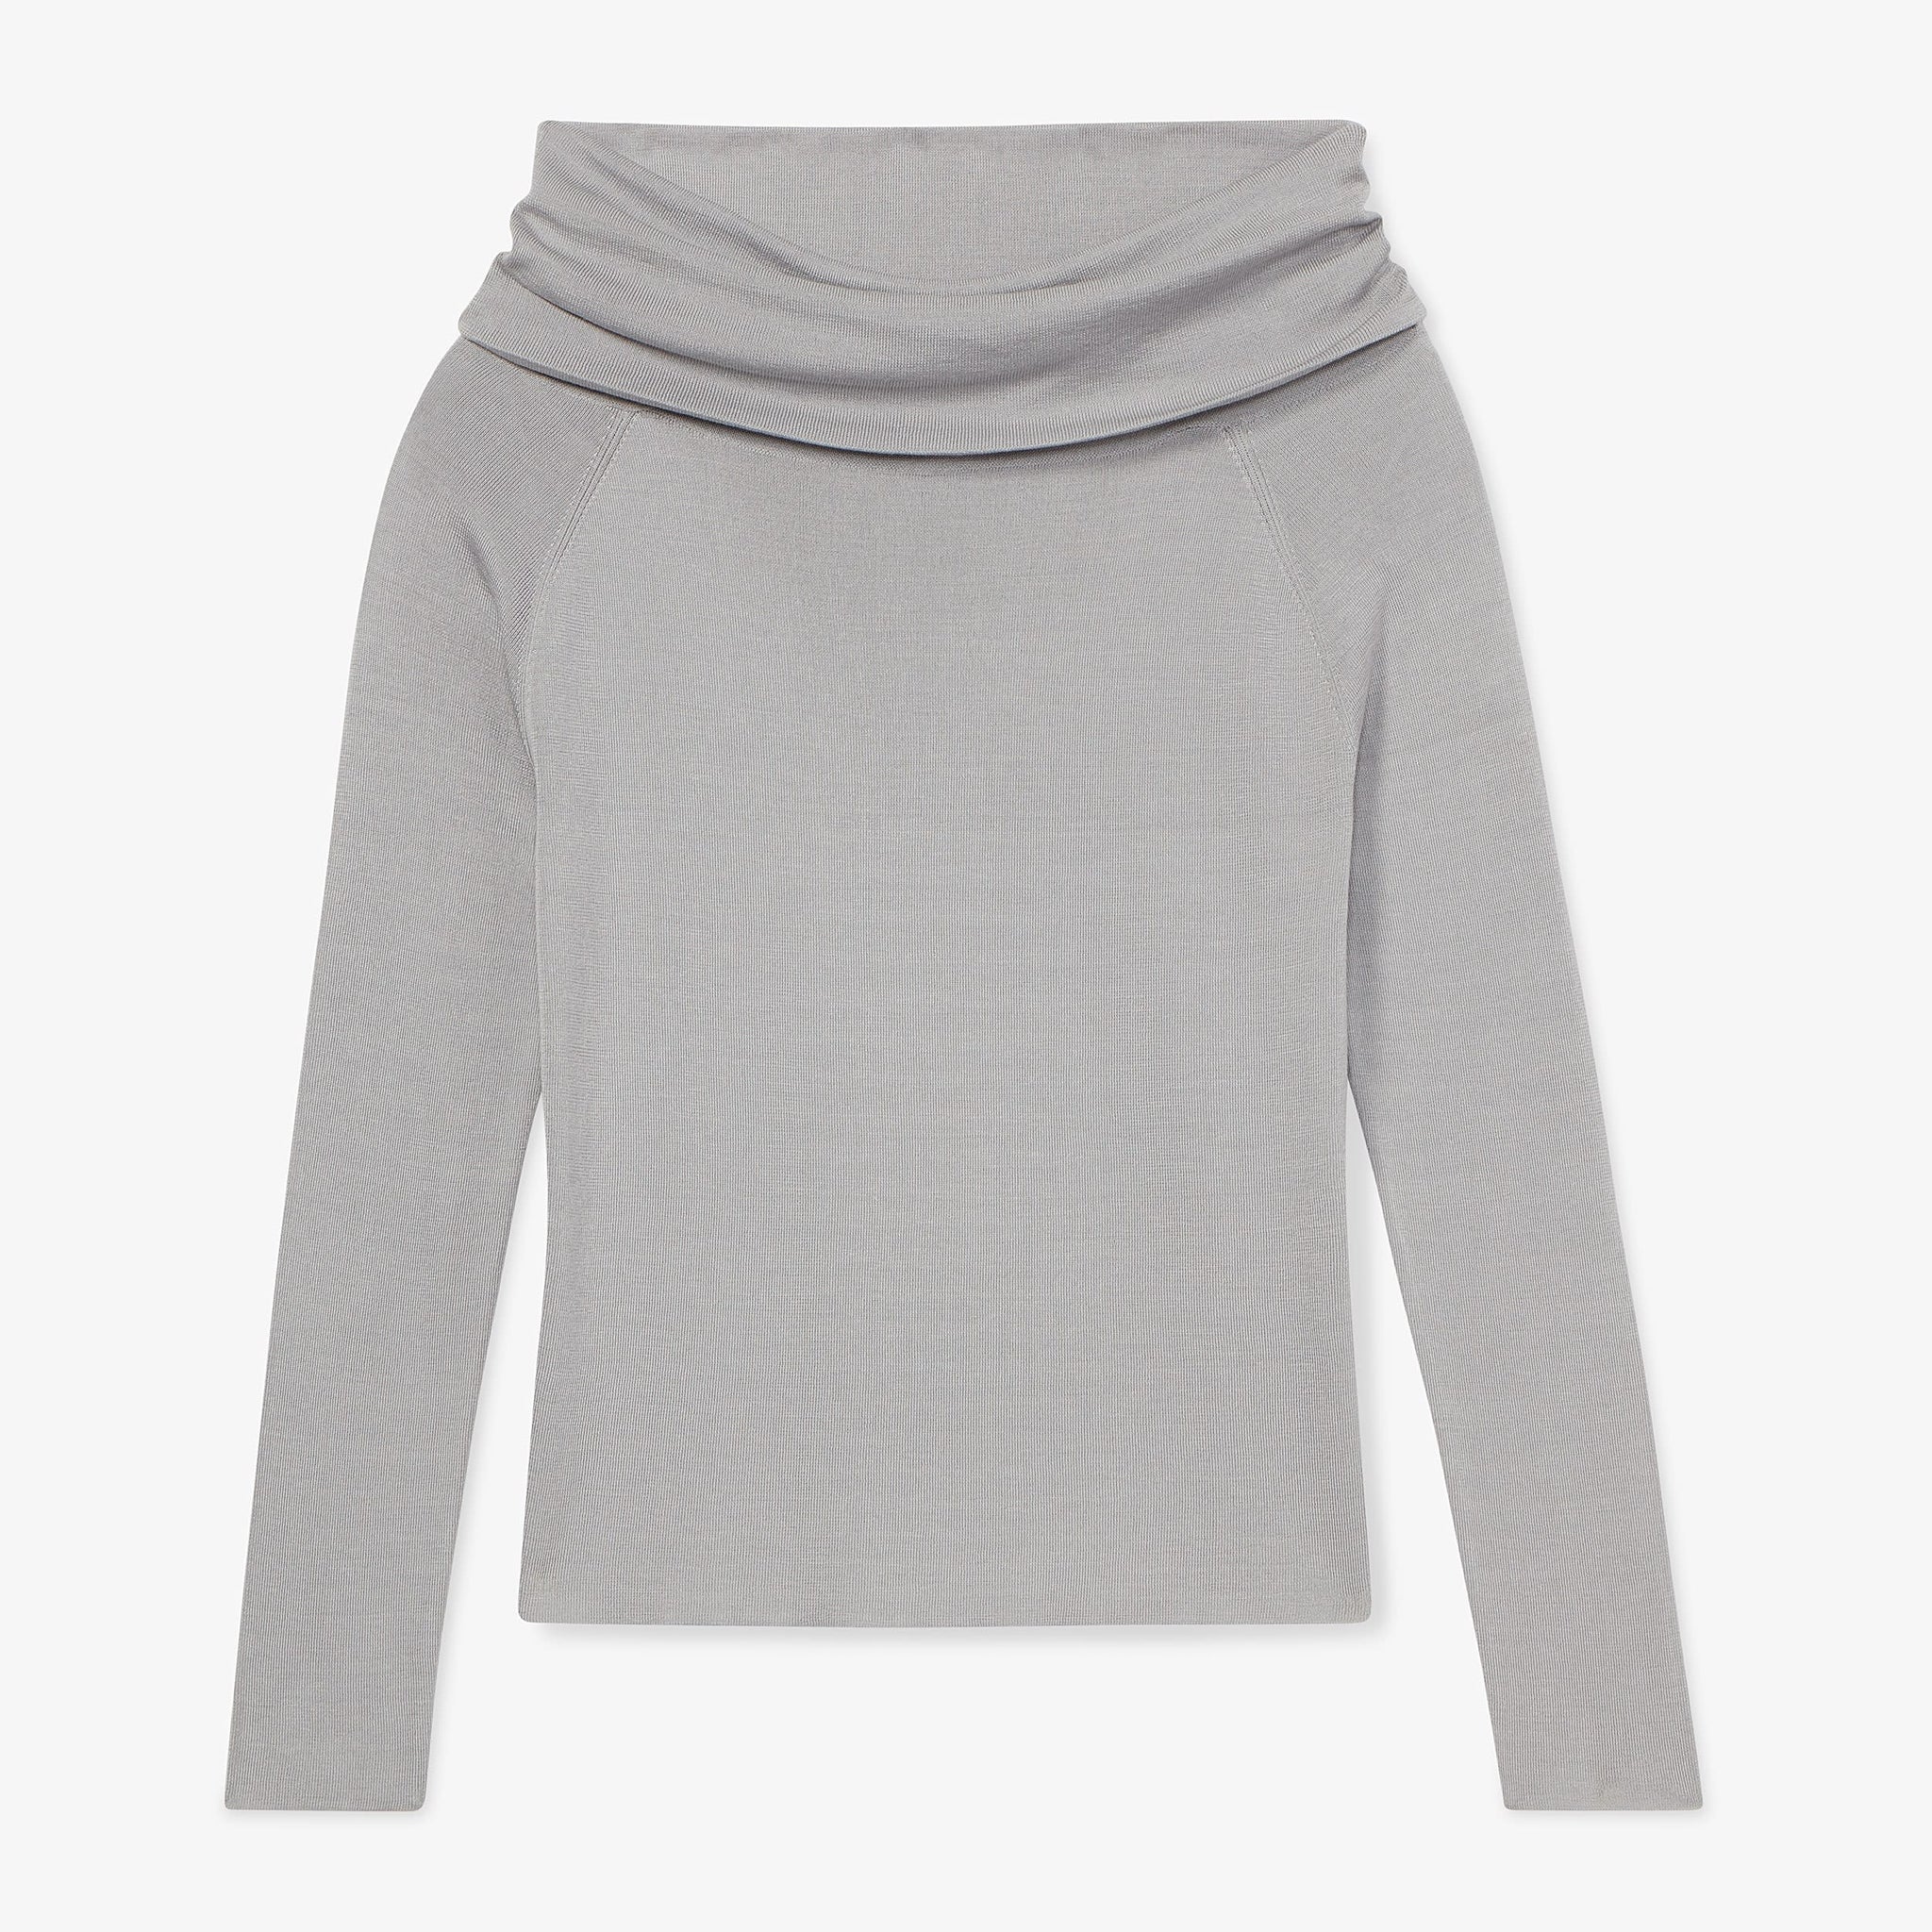 Packshot image of the Dae top in Pale Gray